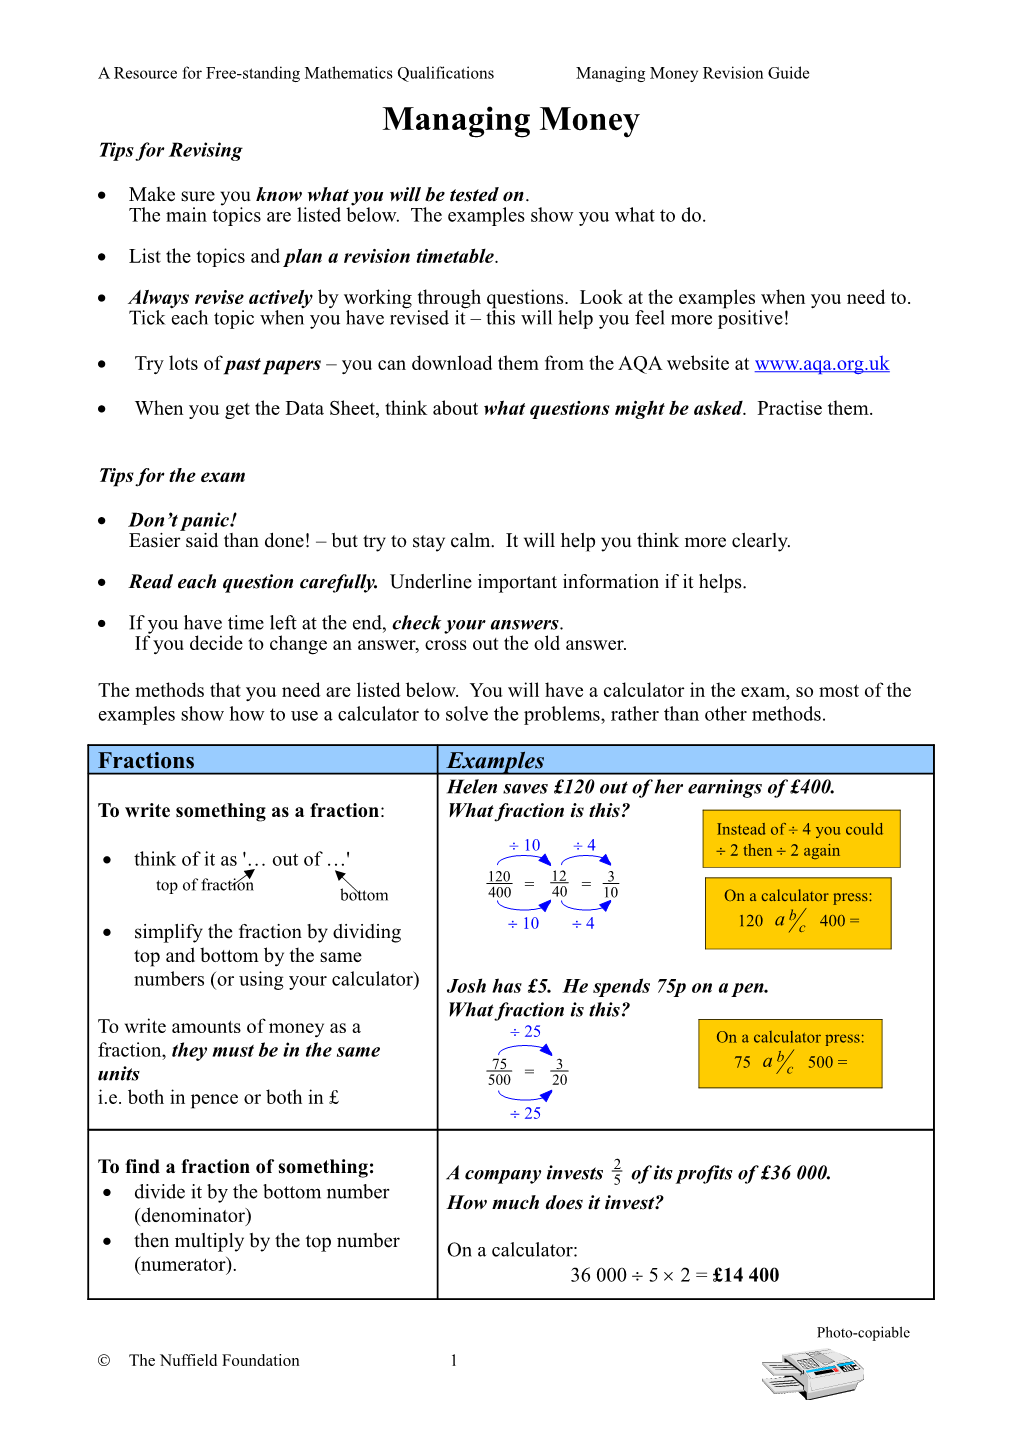 A Resource for Free-Standing Mathematics Qualificationsmanaging Money Revision Guide